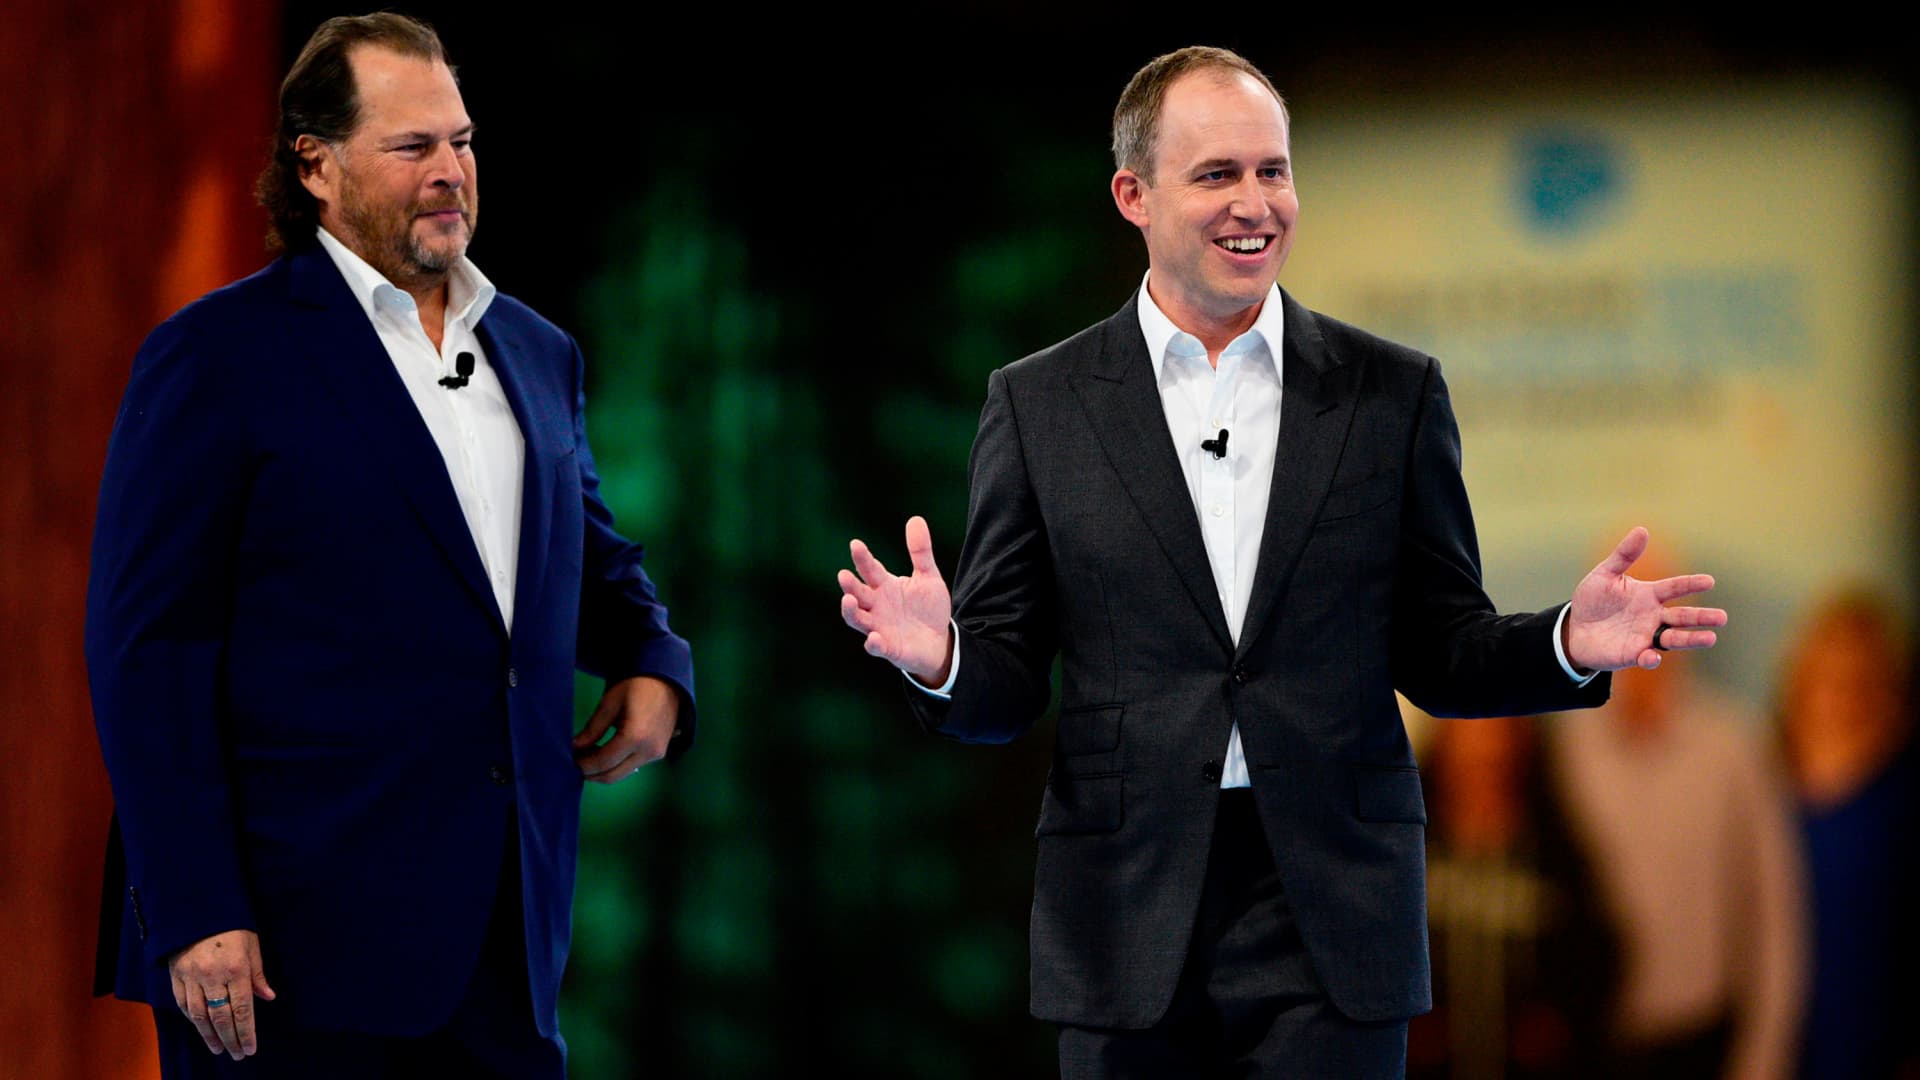 Bret Taylor steps down as Salesforce co-CEO, Marc Benioff stays as CEO